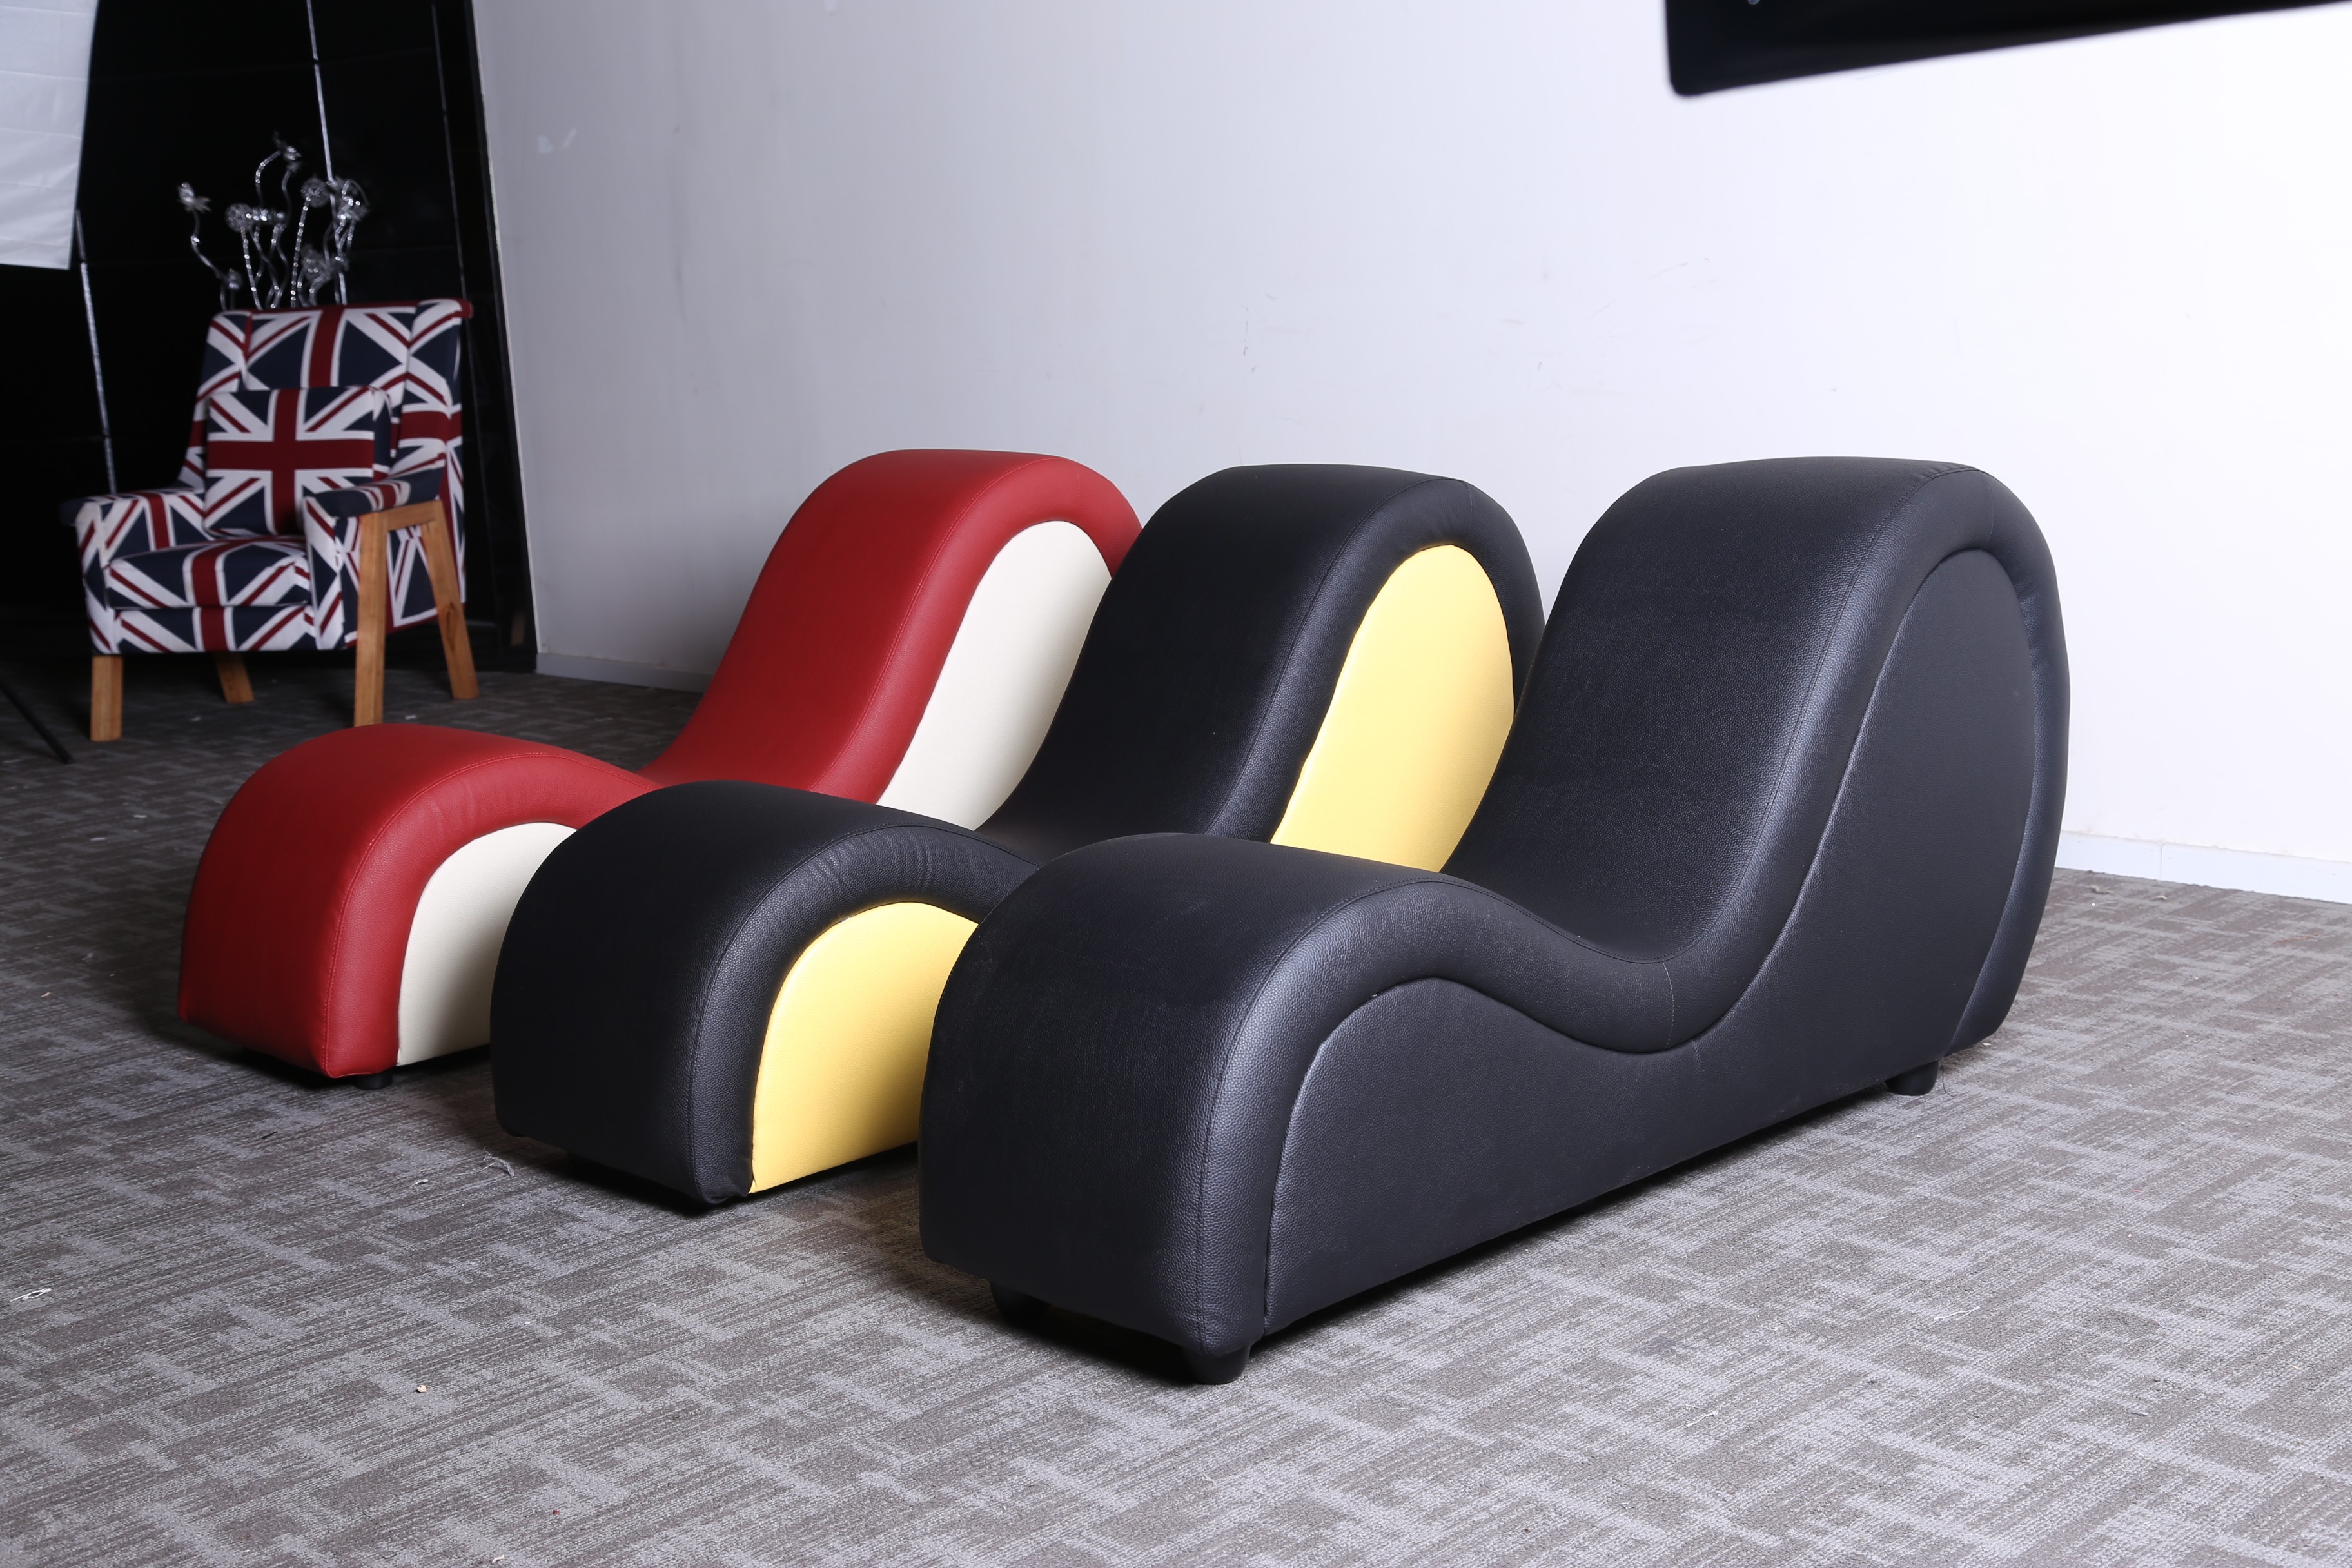 Kama Sutra Chaise Tantra Chair Sex Sofa Love Couch Yoga Seat Black Color (2...